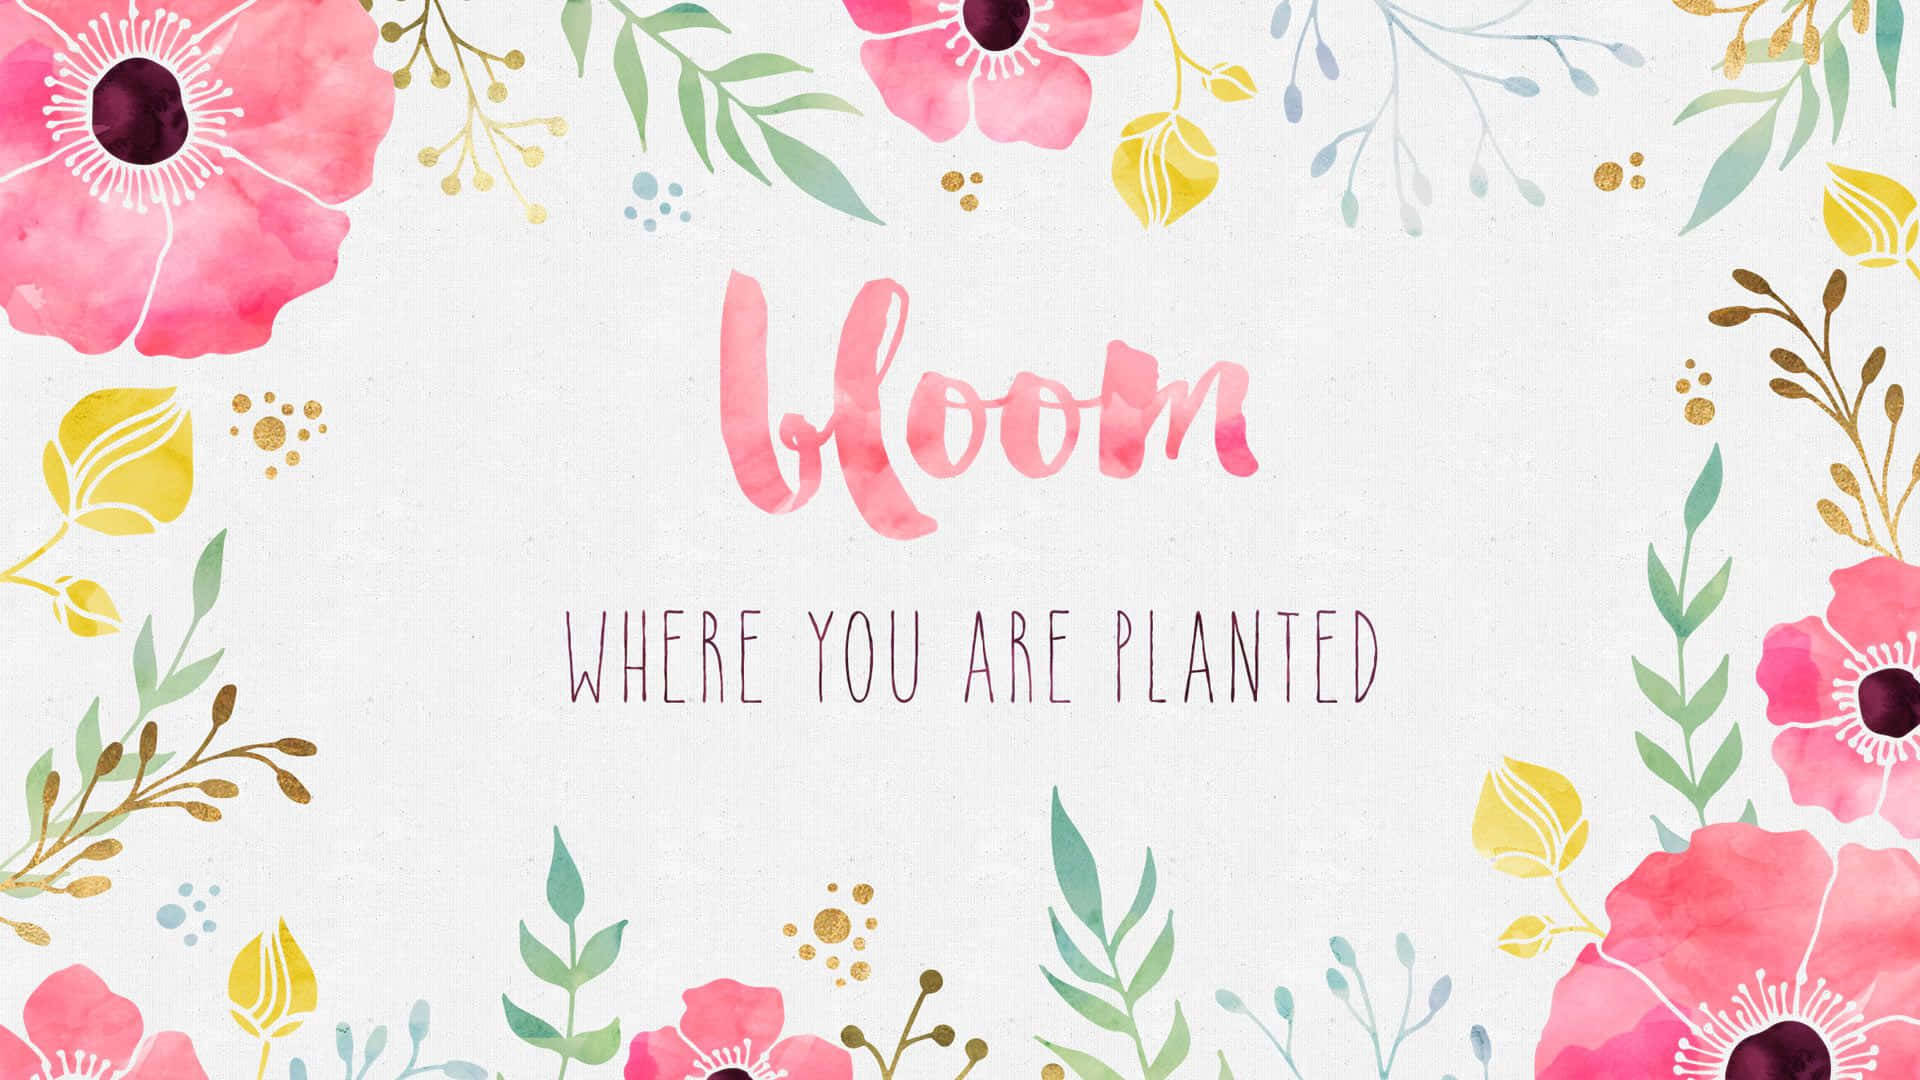 A Watercolor Floral Background With The Words Bloom Where You Are Planted